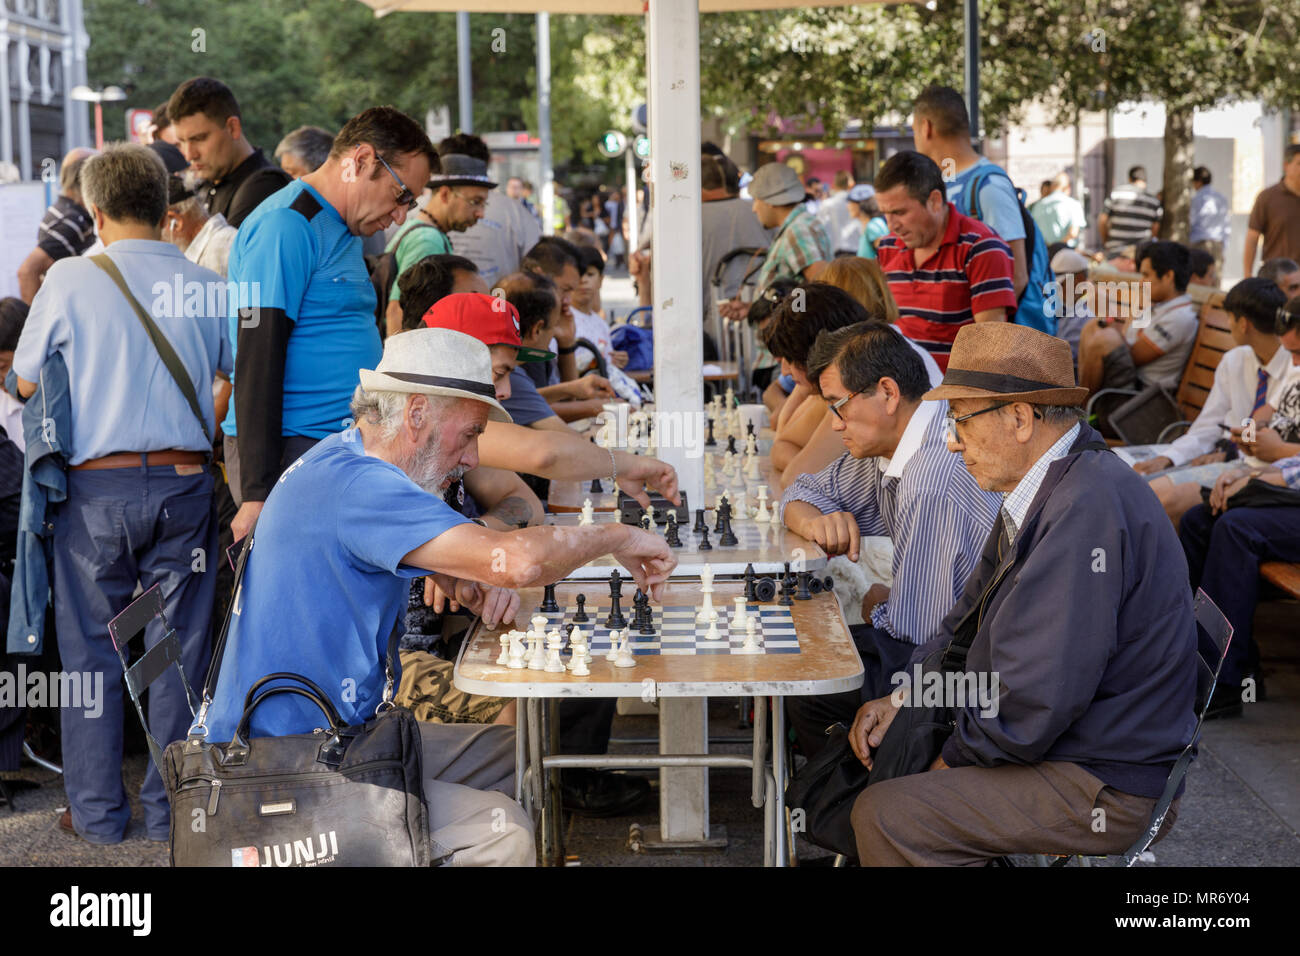 Santiago, Chile: Chess is a popular pastime with men at the Plaza de Armas. Stock Photo